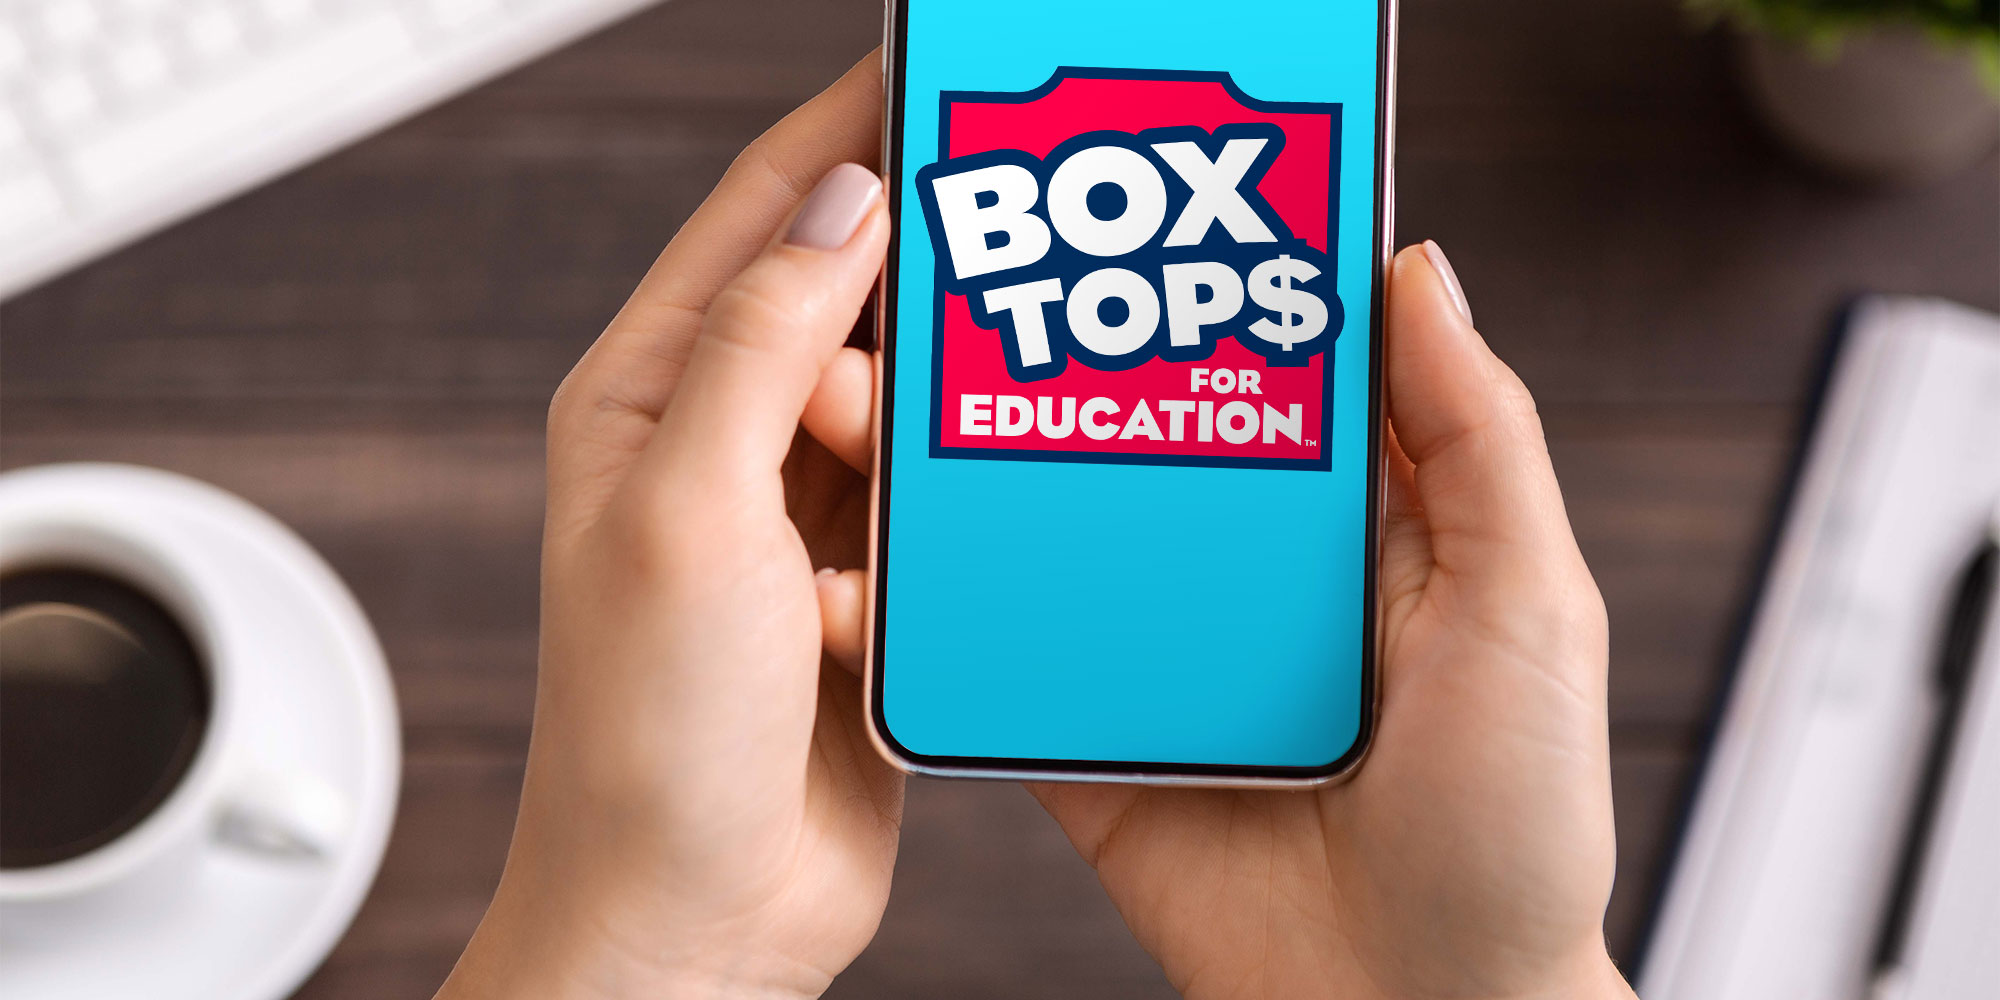 Smart phone in hands, phone screen displays Box Tops for Education